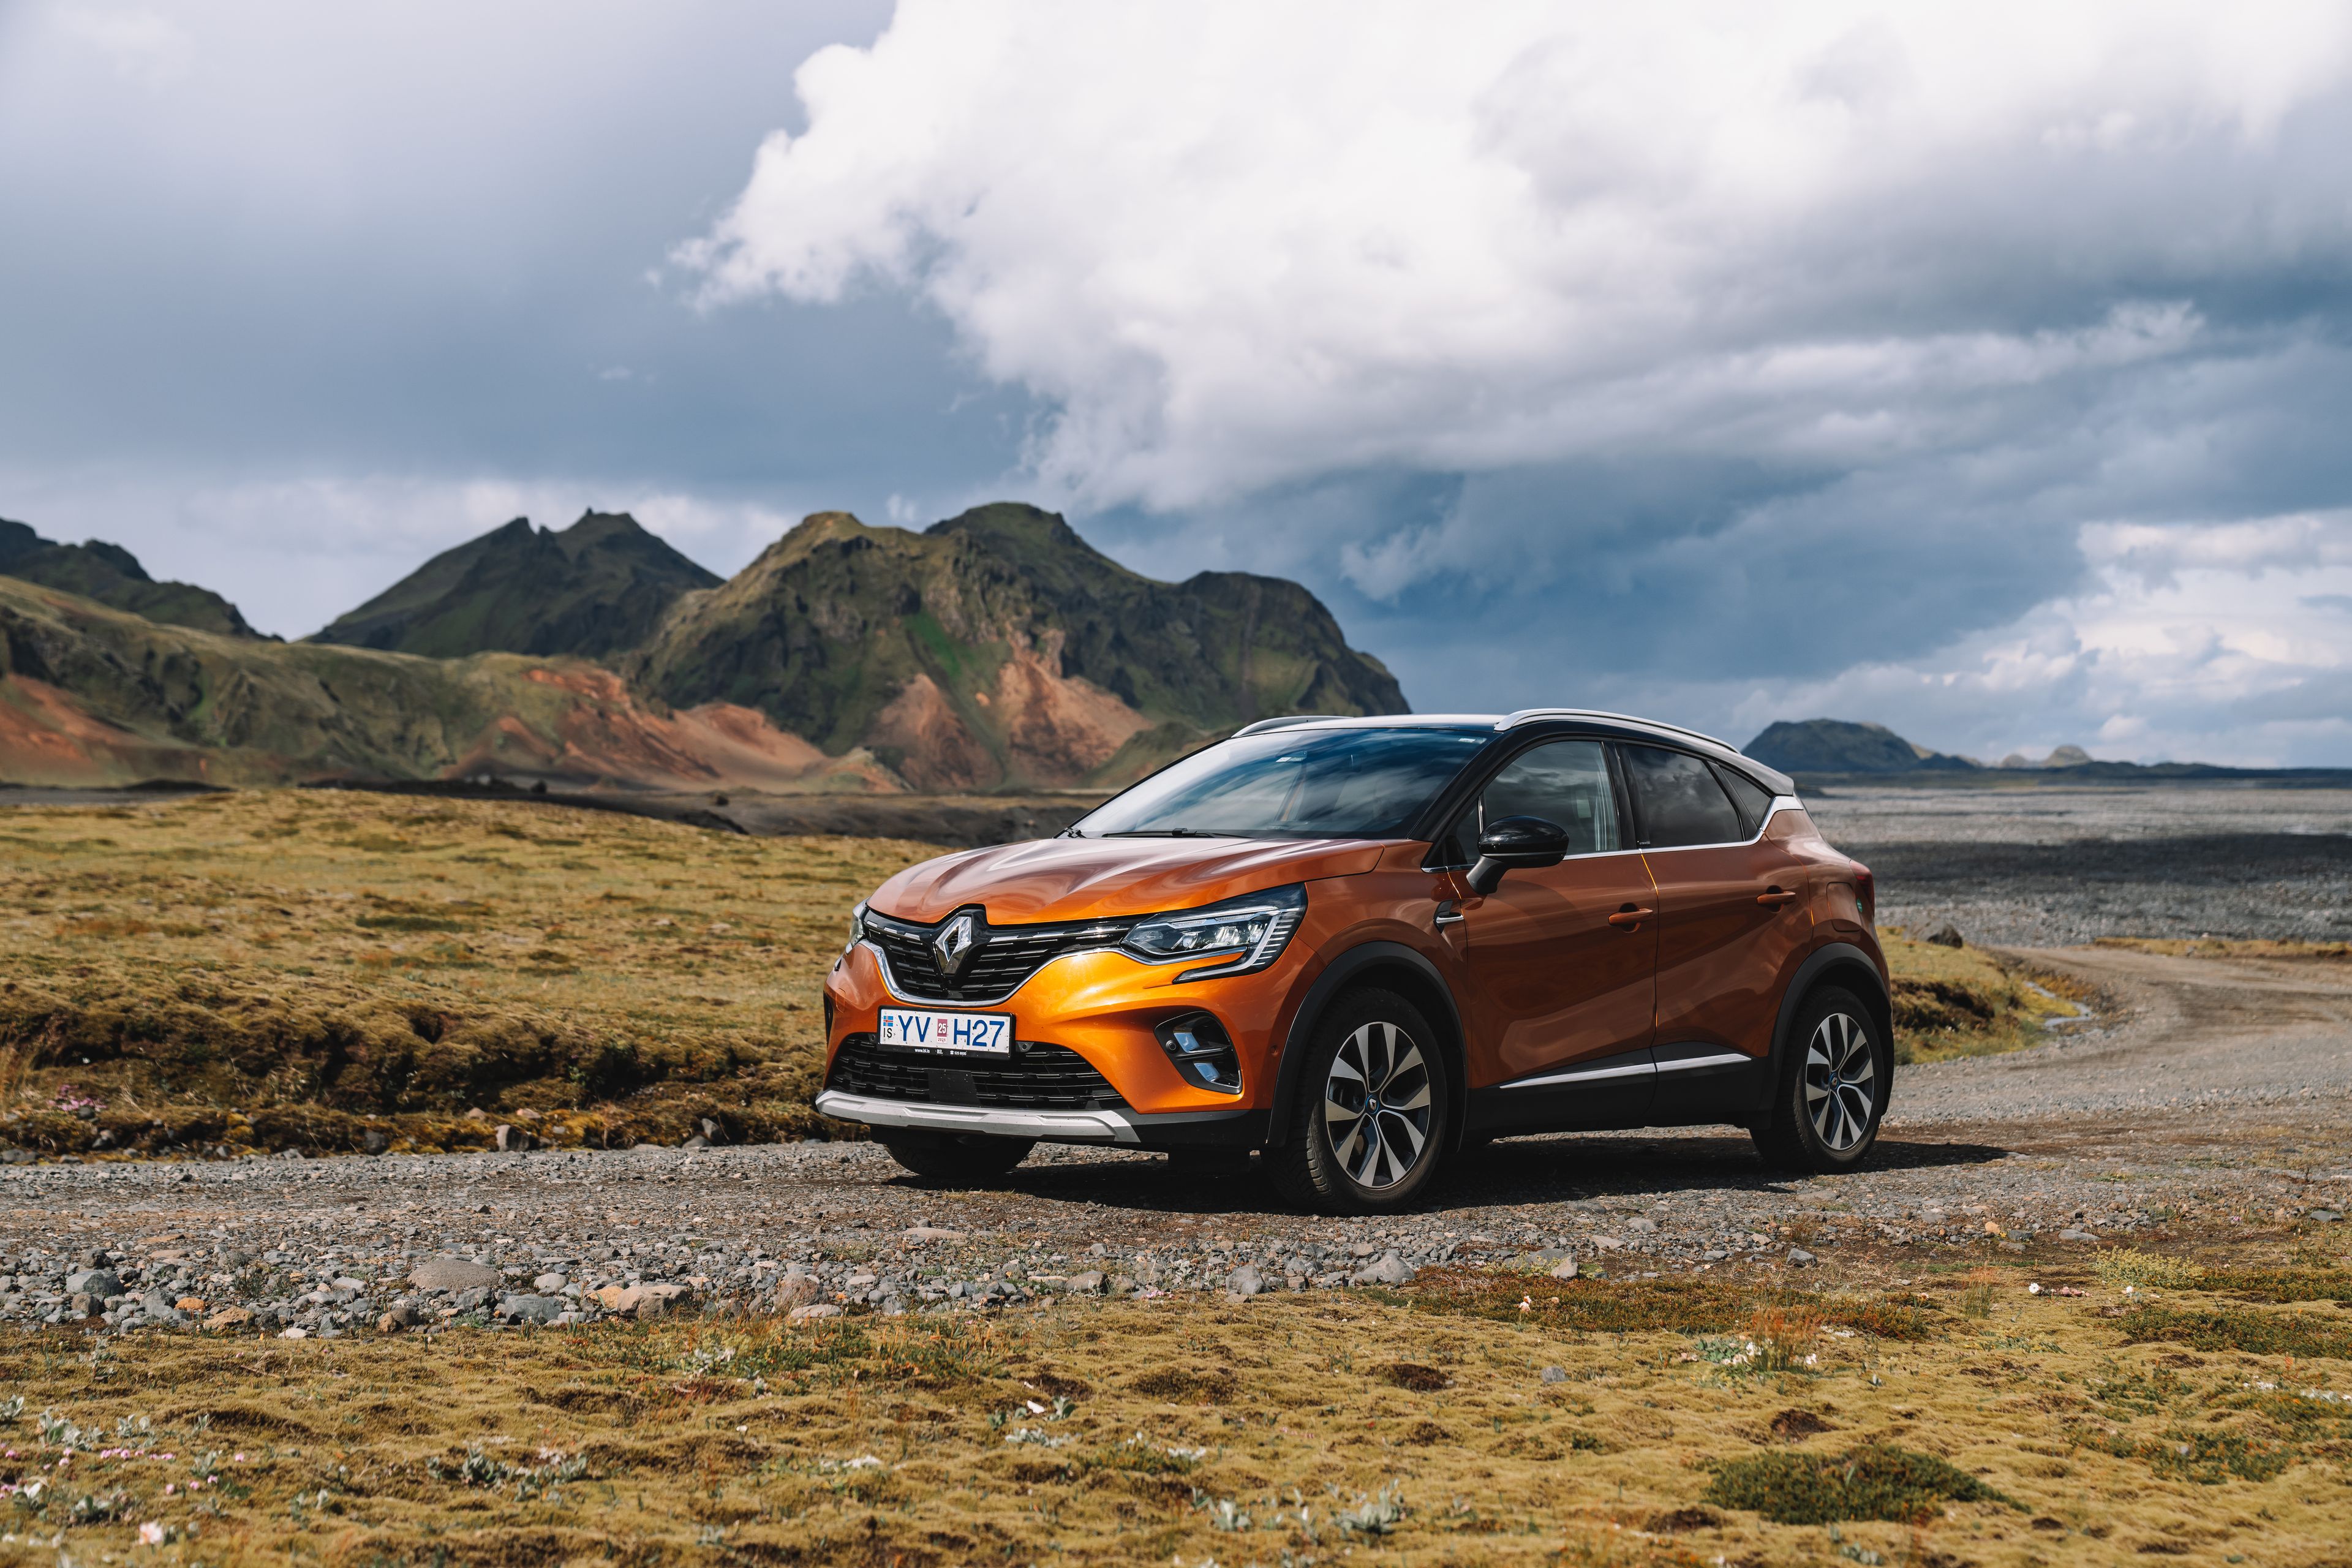 The renault Captur parked in a beautiful Icelandic landscape